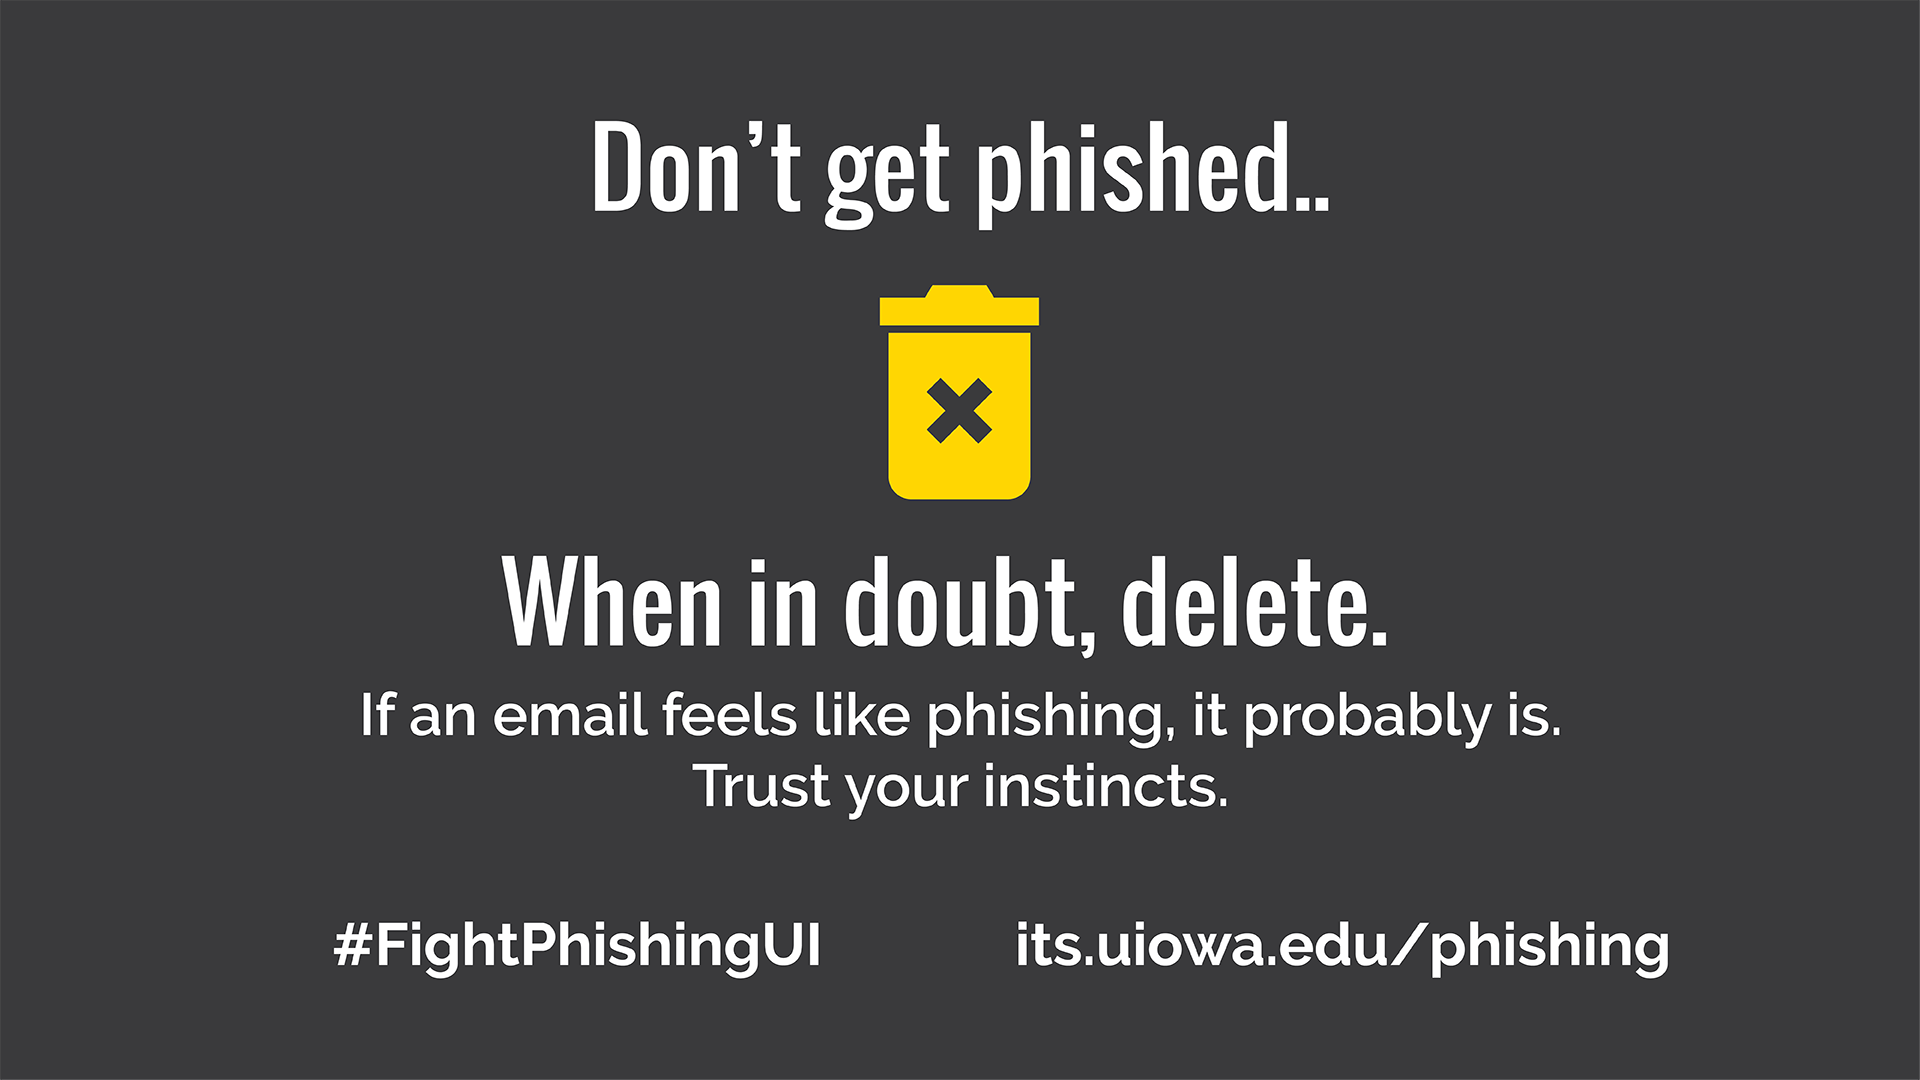 Don't get phished.. When in doubt, delete. If an email feels like phishing. It probably is. Trust your instincts. #FightPhishingUI its.uiowa.edu/phishing